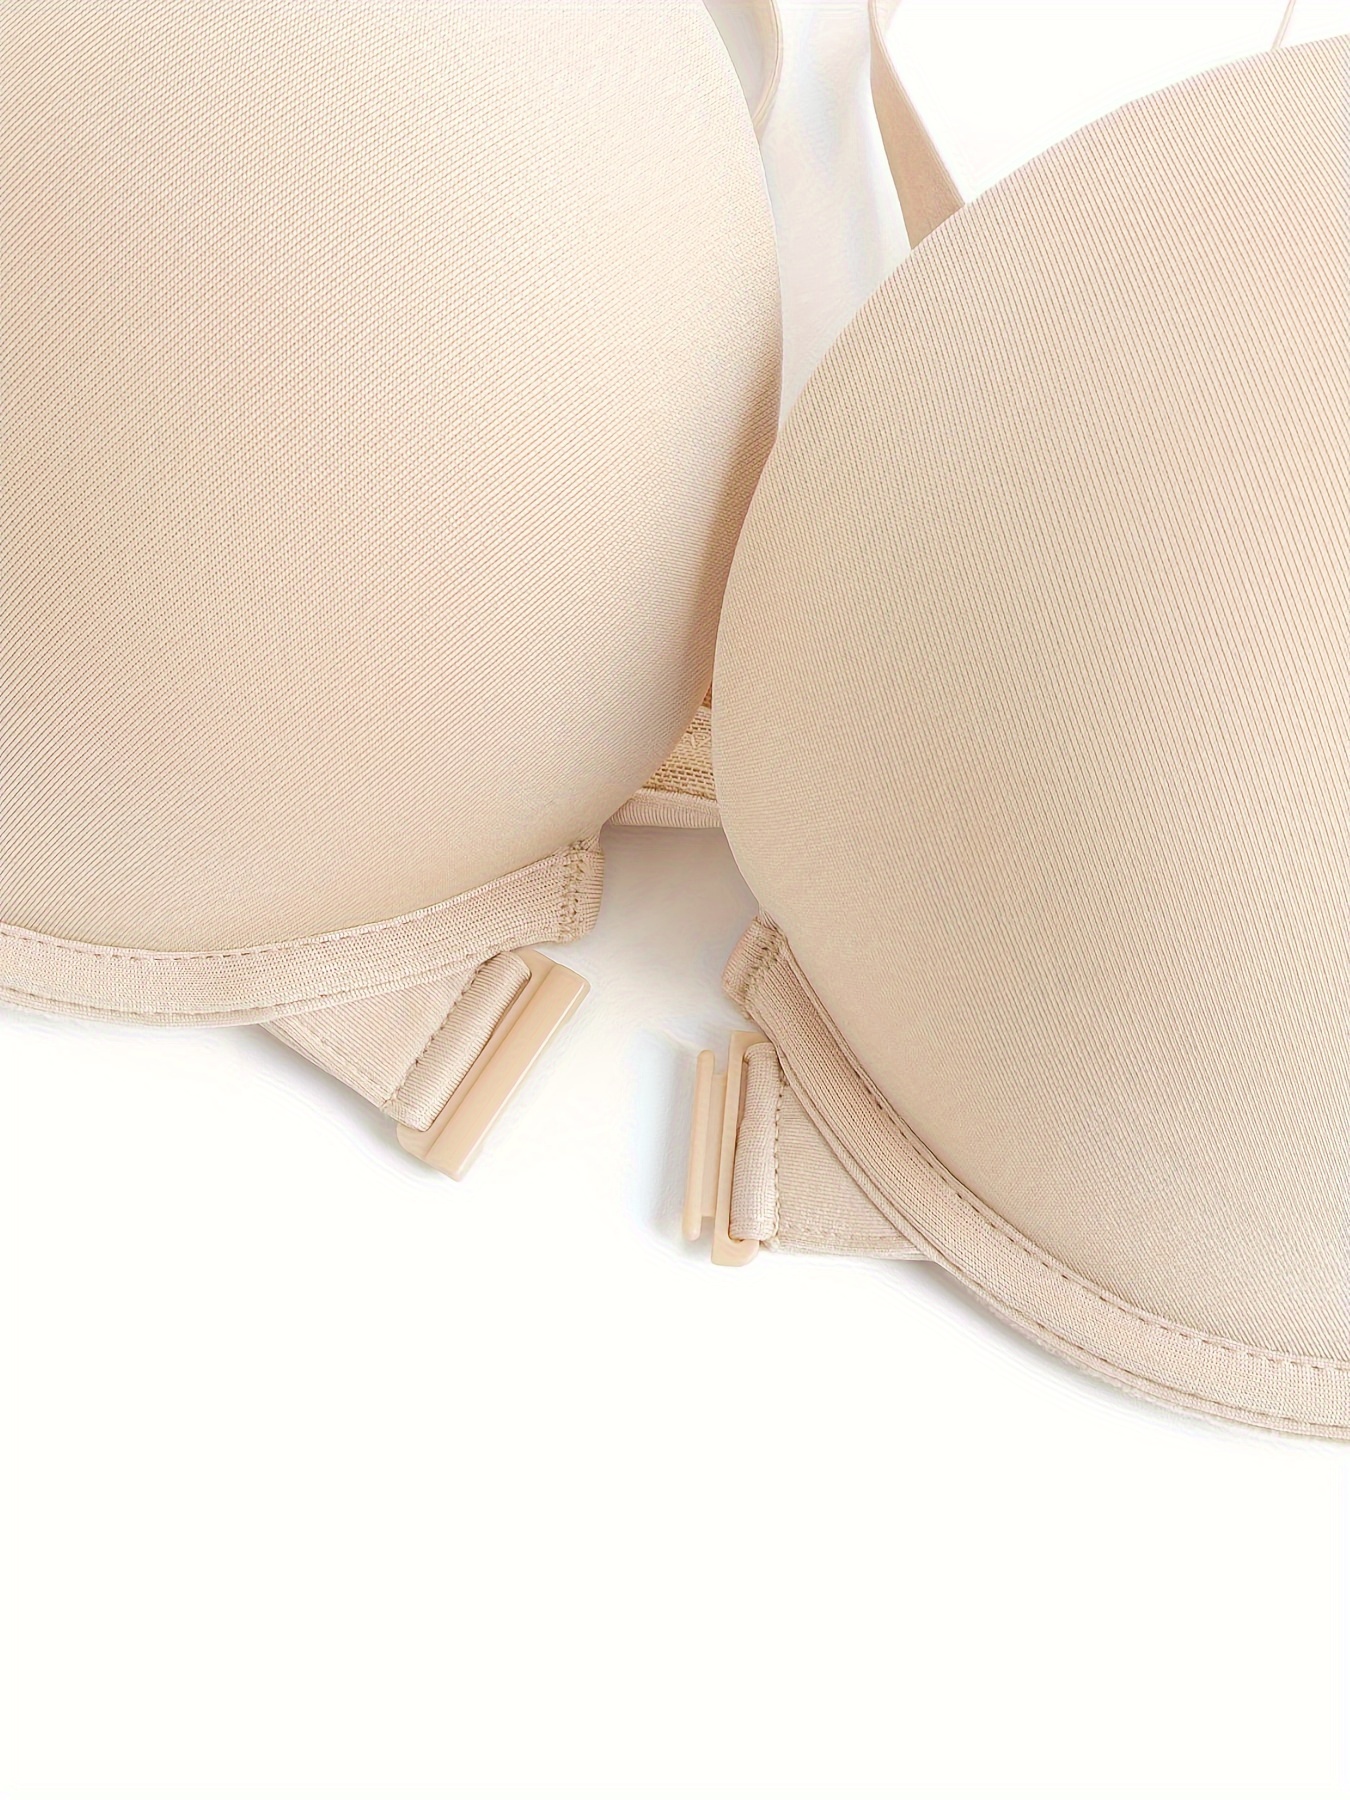 Front Close Push Up Bras for Women Plus Size Wirefree Bras Padded Bra Lace  Tank Sexy Front Closure Bralettes Cotton Beige at  Women's Clothing  store